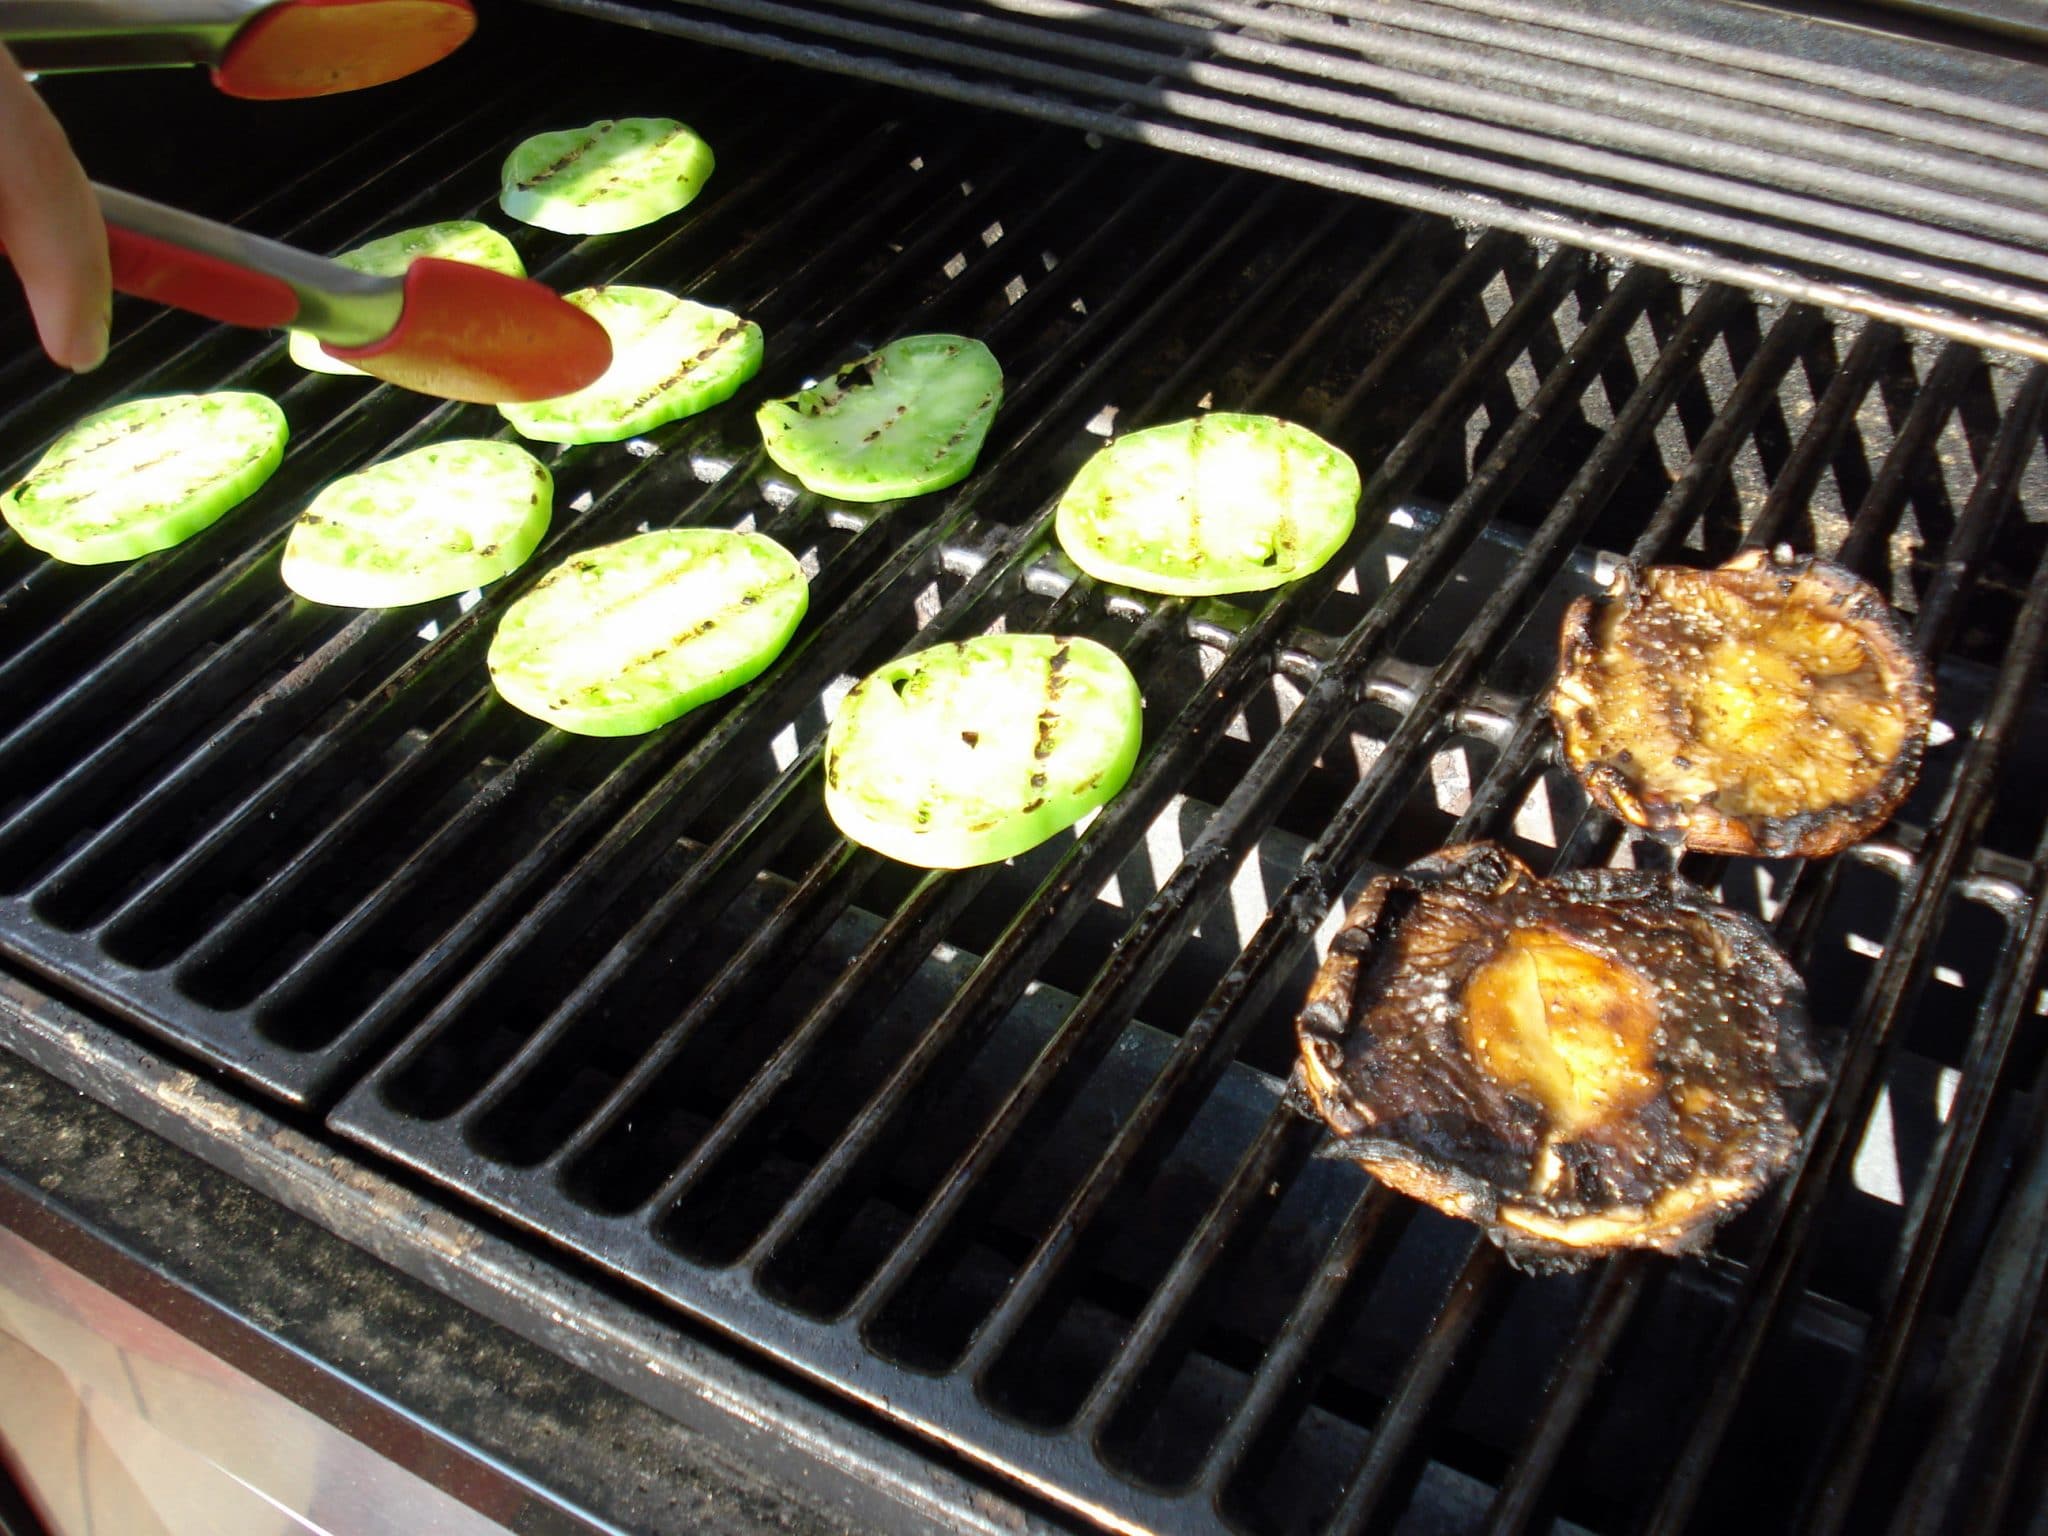 Eggplant and onion on grill